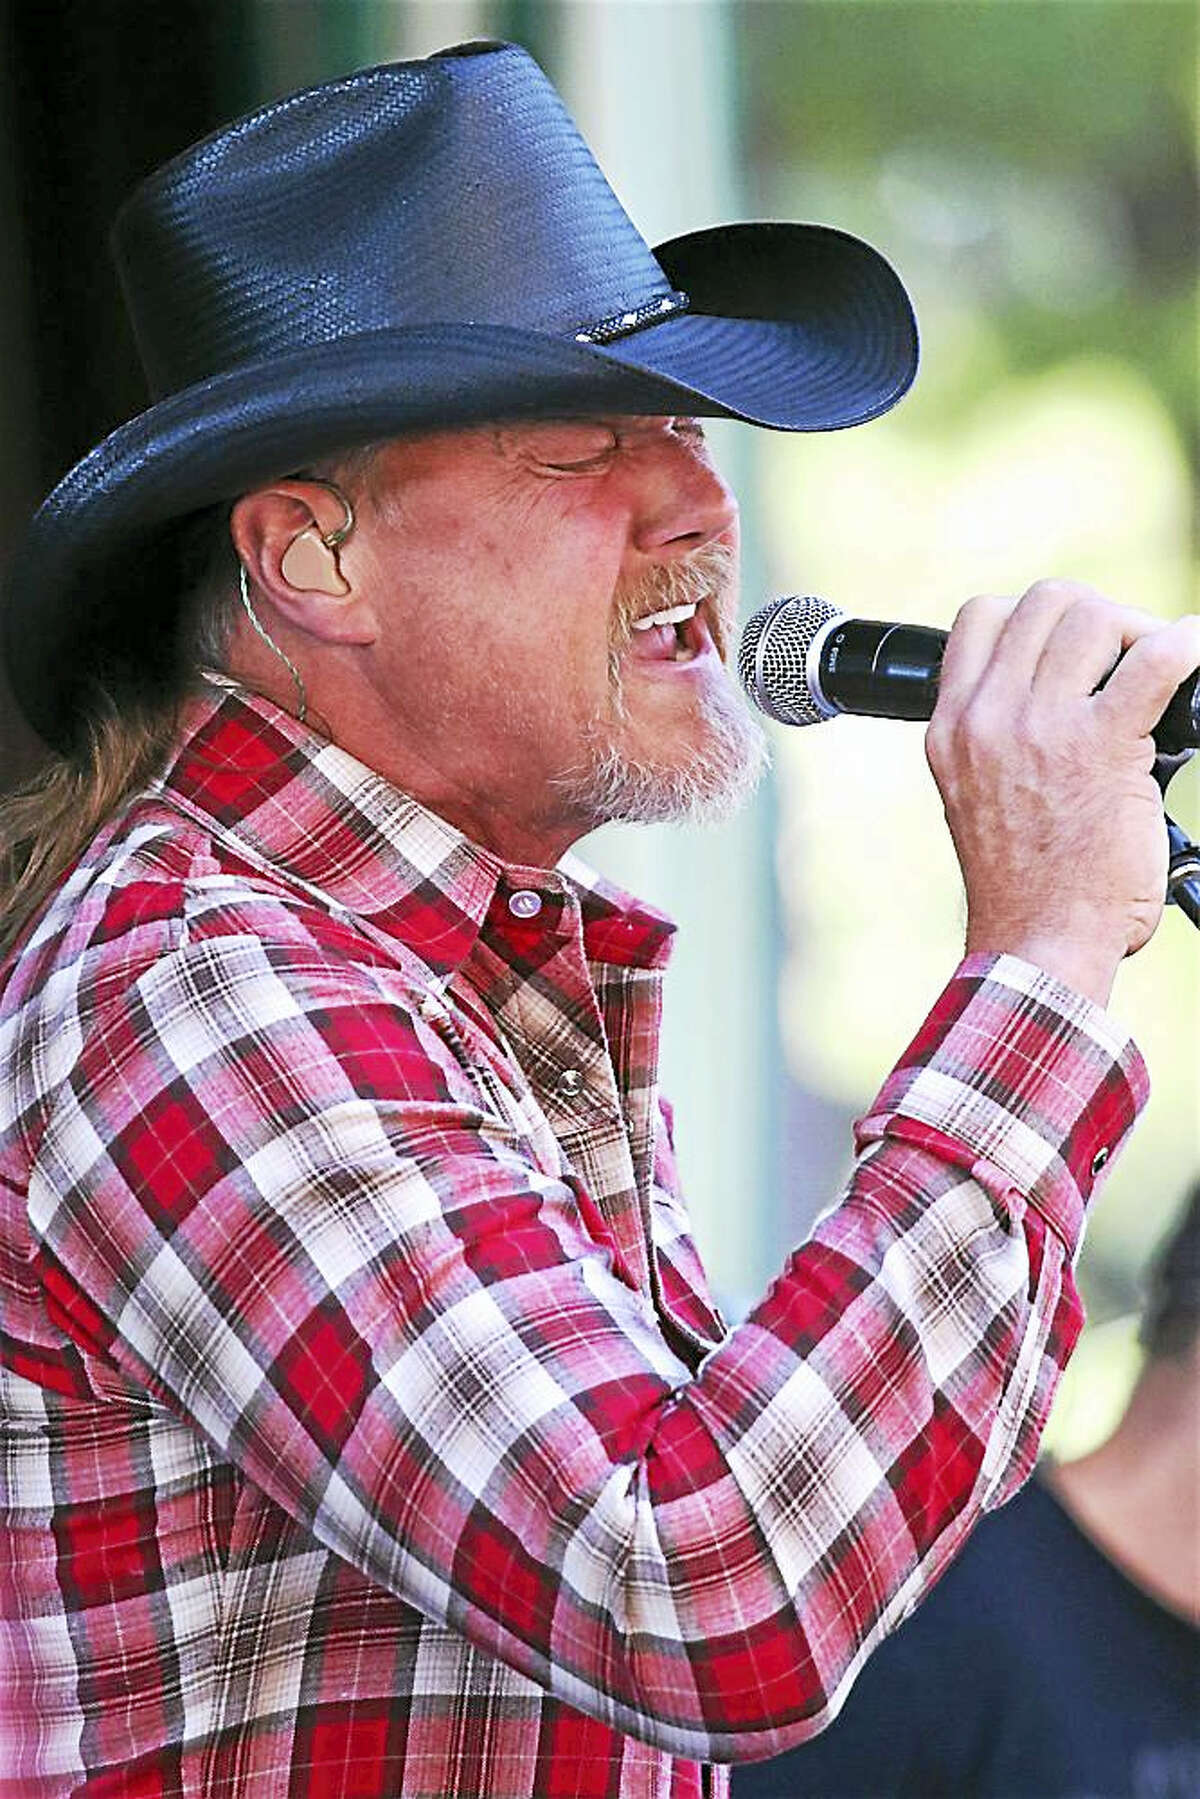 Photo by John AtashianSinger and actor Trace Adkins is shown singing with strong emotion during his performance at Indian Ranch in Webster, Massachusetts Sept. 25. Trace’s appearance was the final show of the season at the beautiful Indian Ranch campground. To learn more about this great outdoor music venue you can visit www.indianranch.com